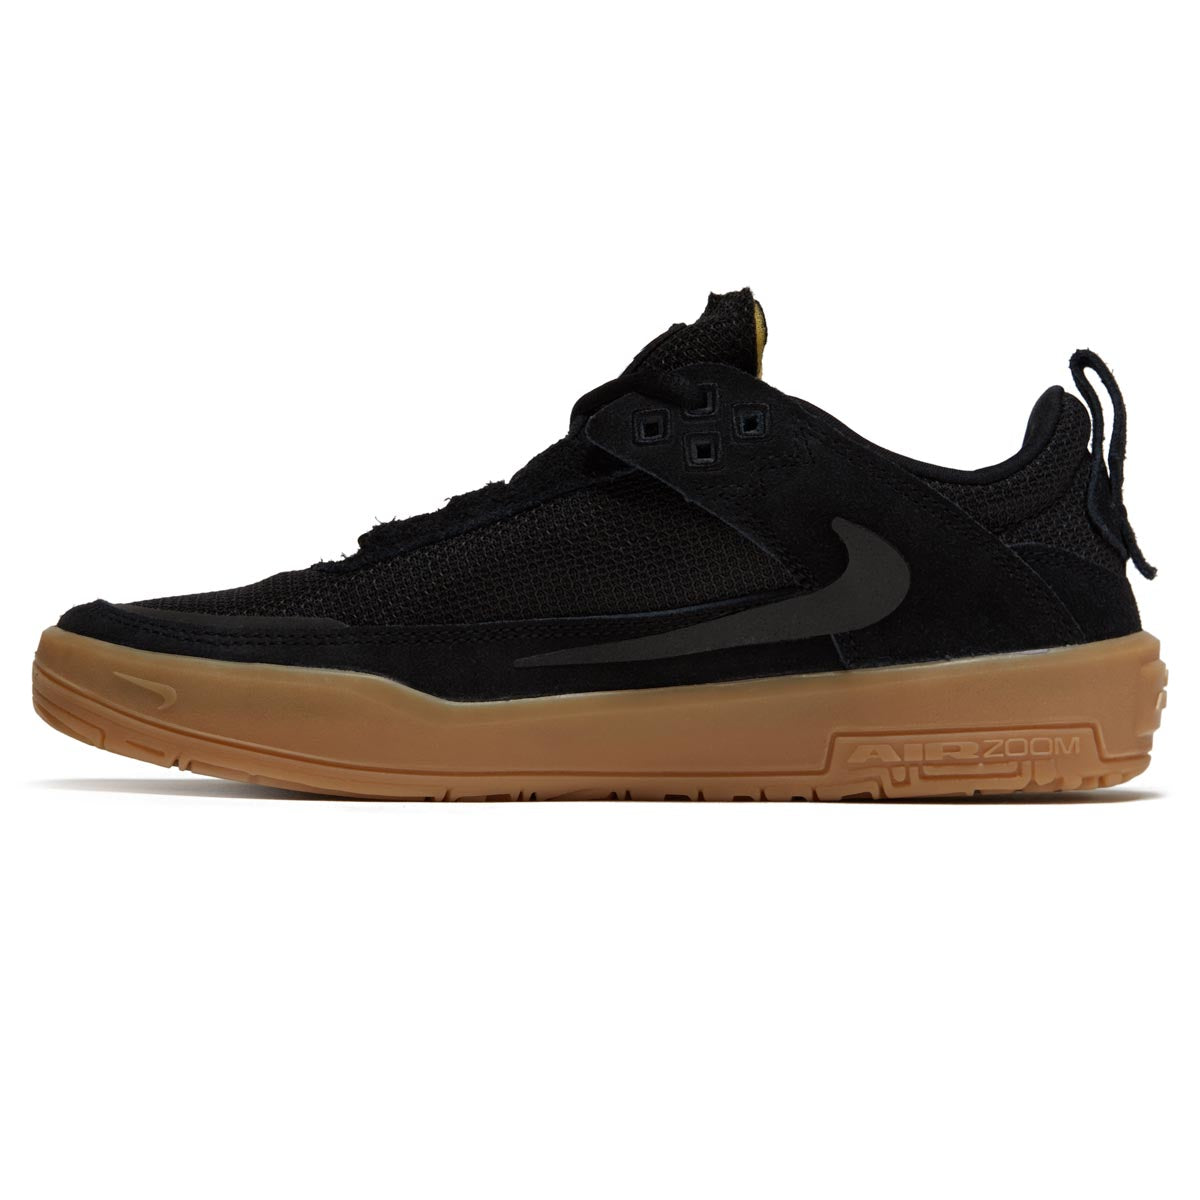 Nike SB Youth Day One Shoes - Black/Black/Gum Light Brown/White image 2